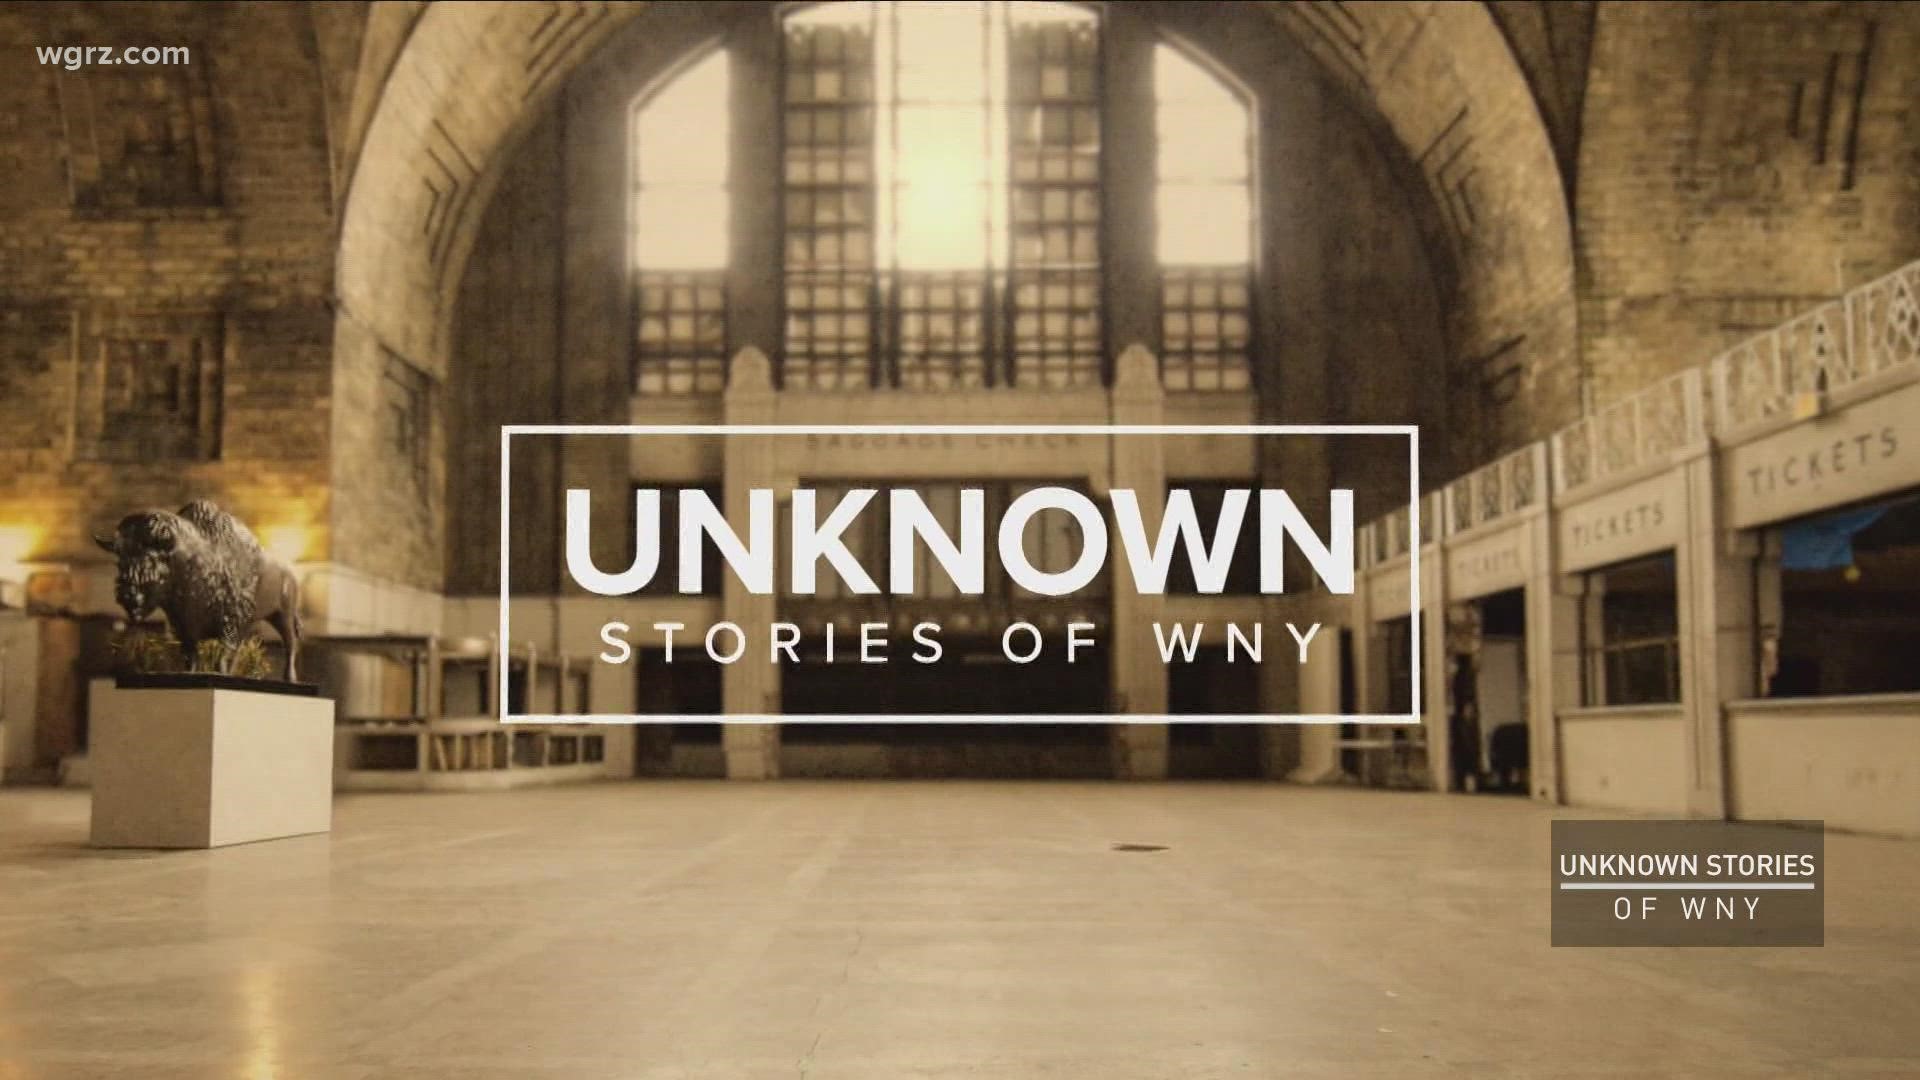 2 On Your Side's Pete Gallivan takes a look back at the unknown stories of WNY.